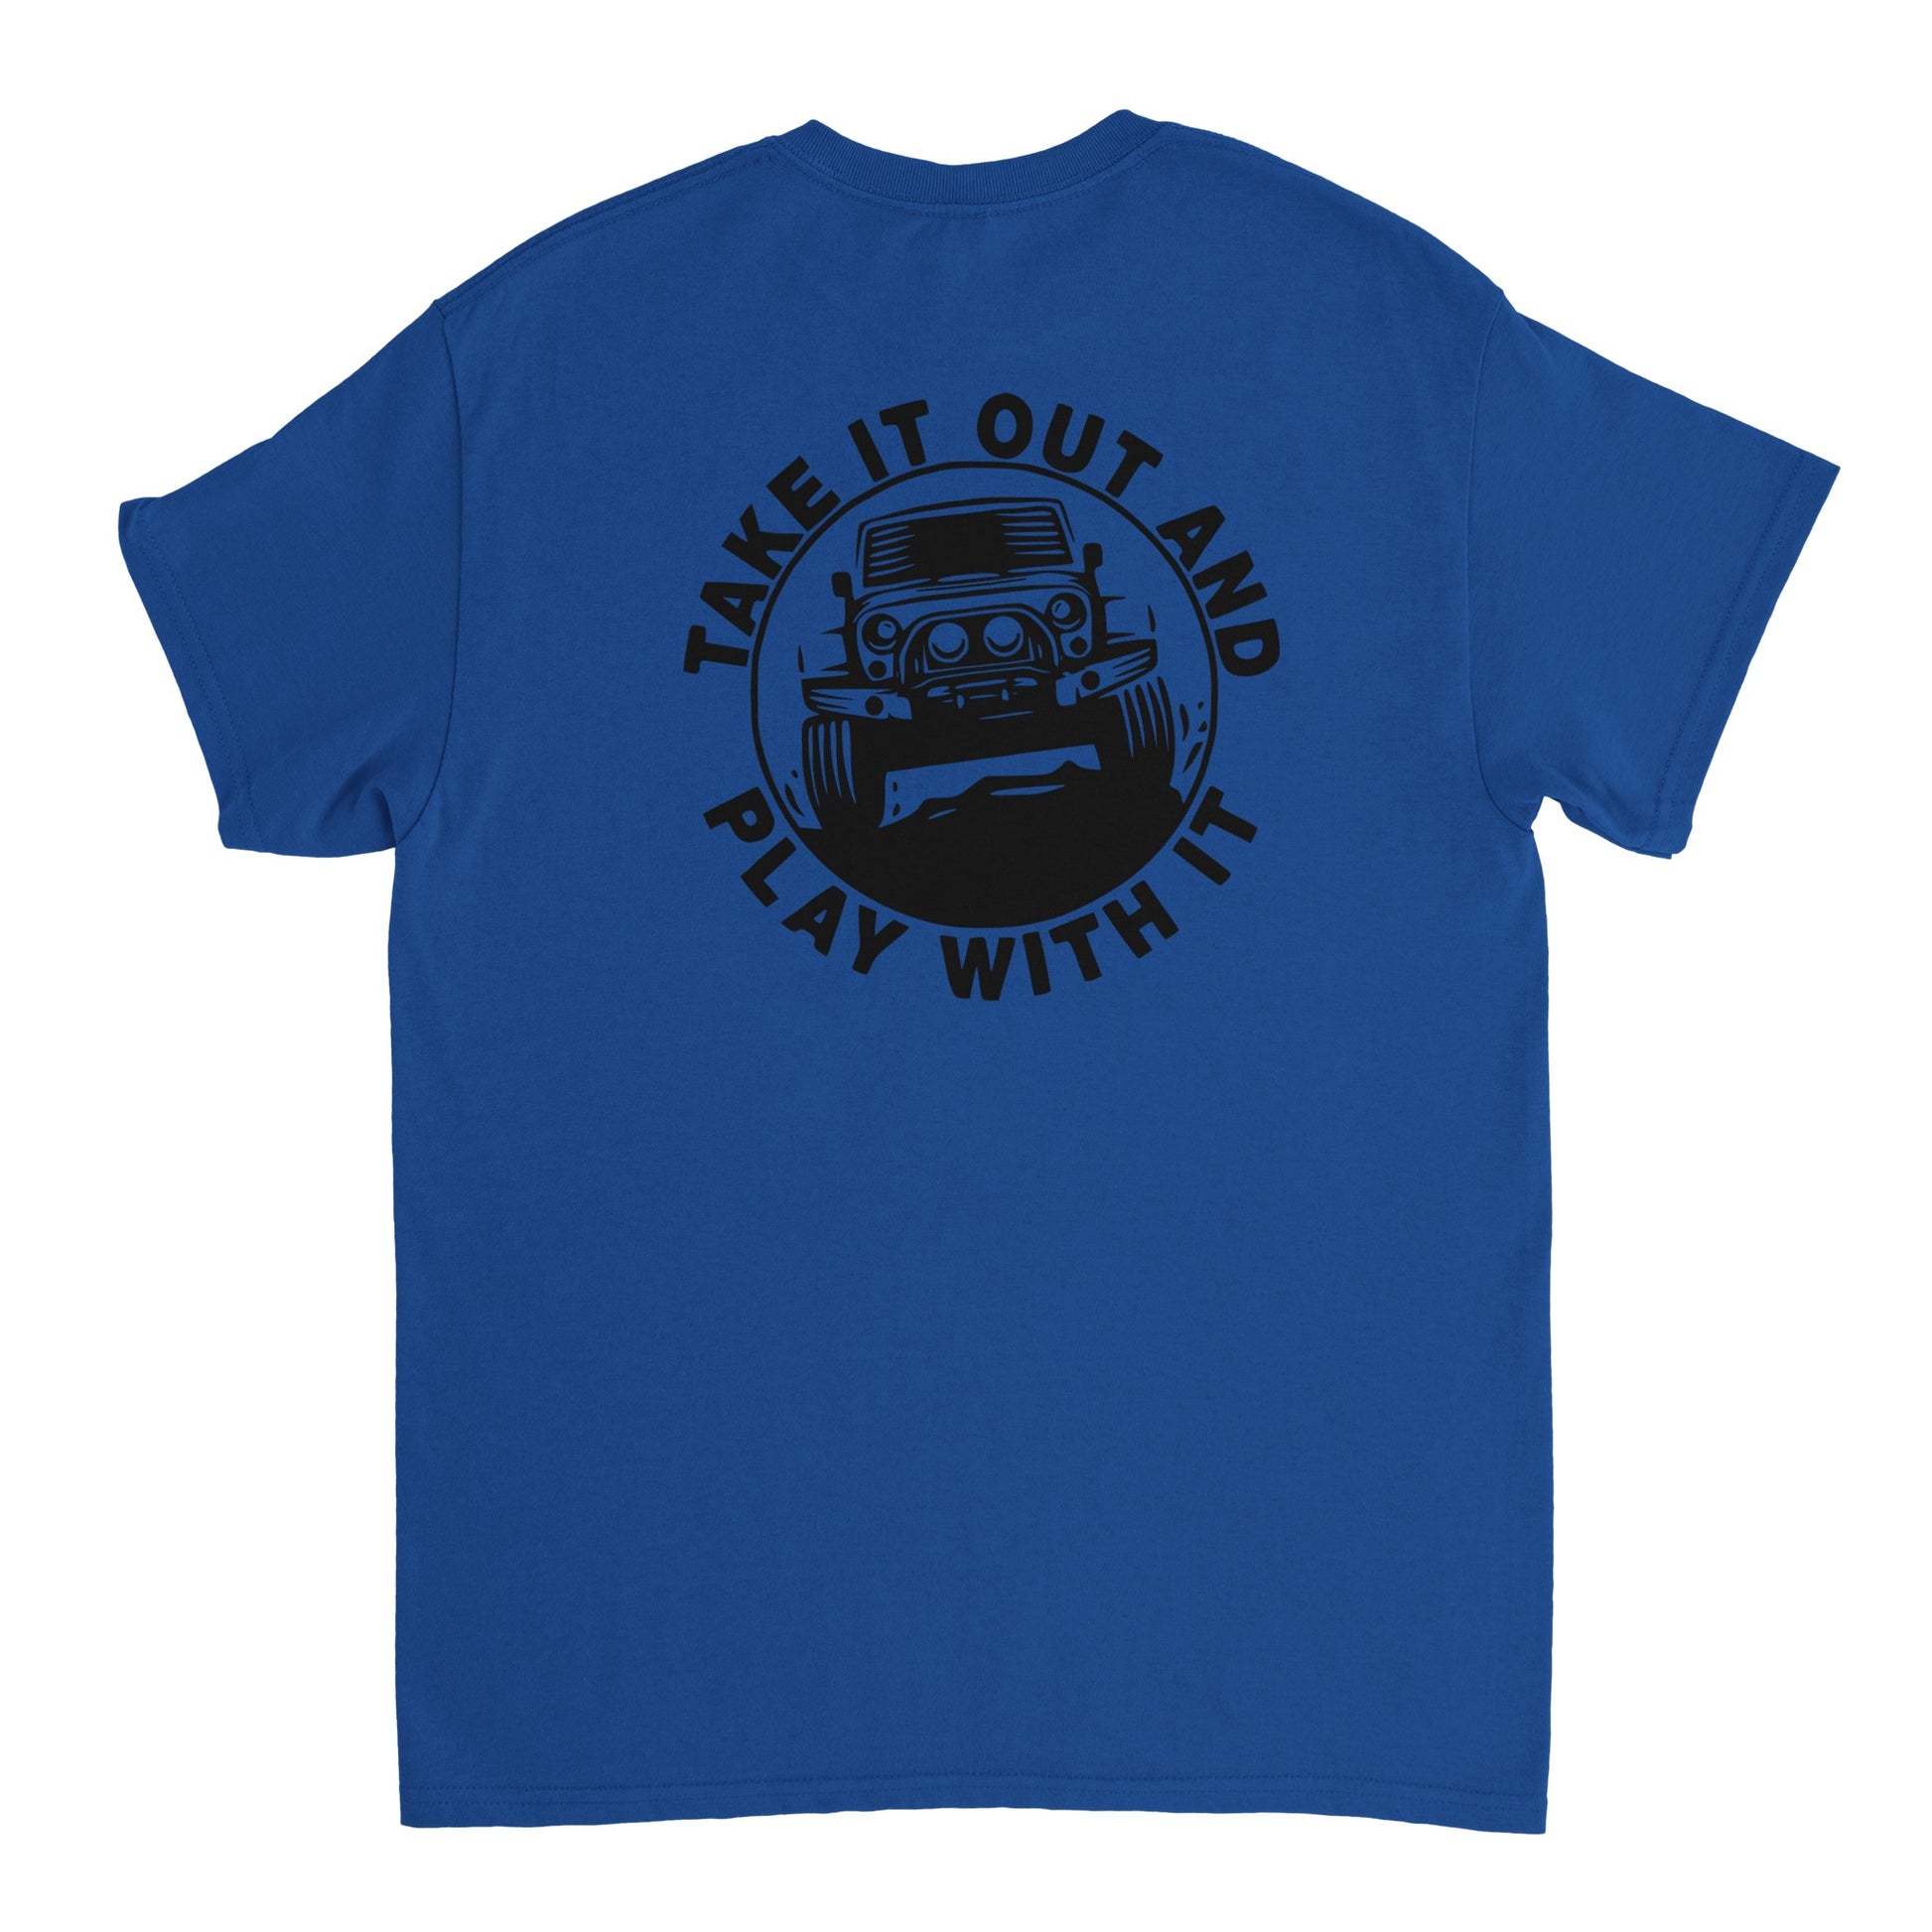 Take it out and Play with it T-shirt - Mister Snarky's